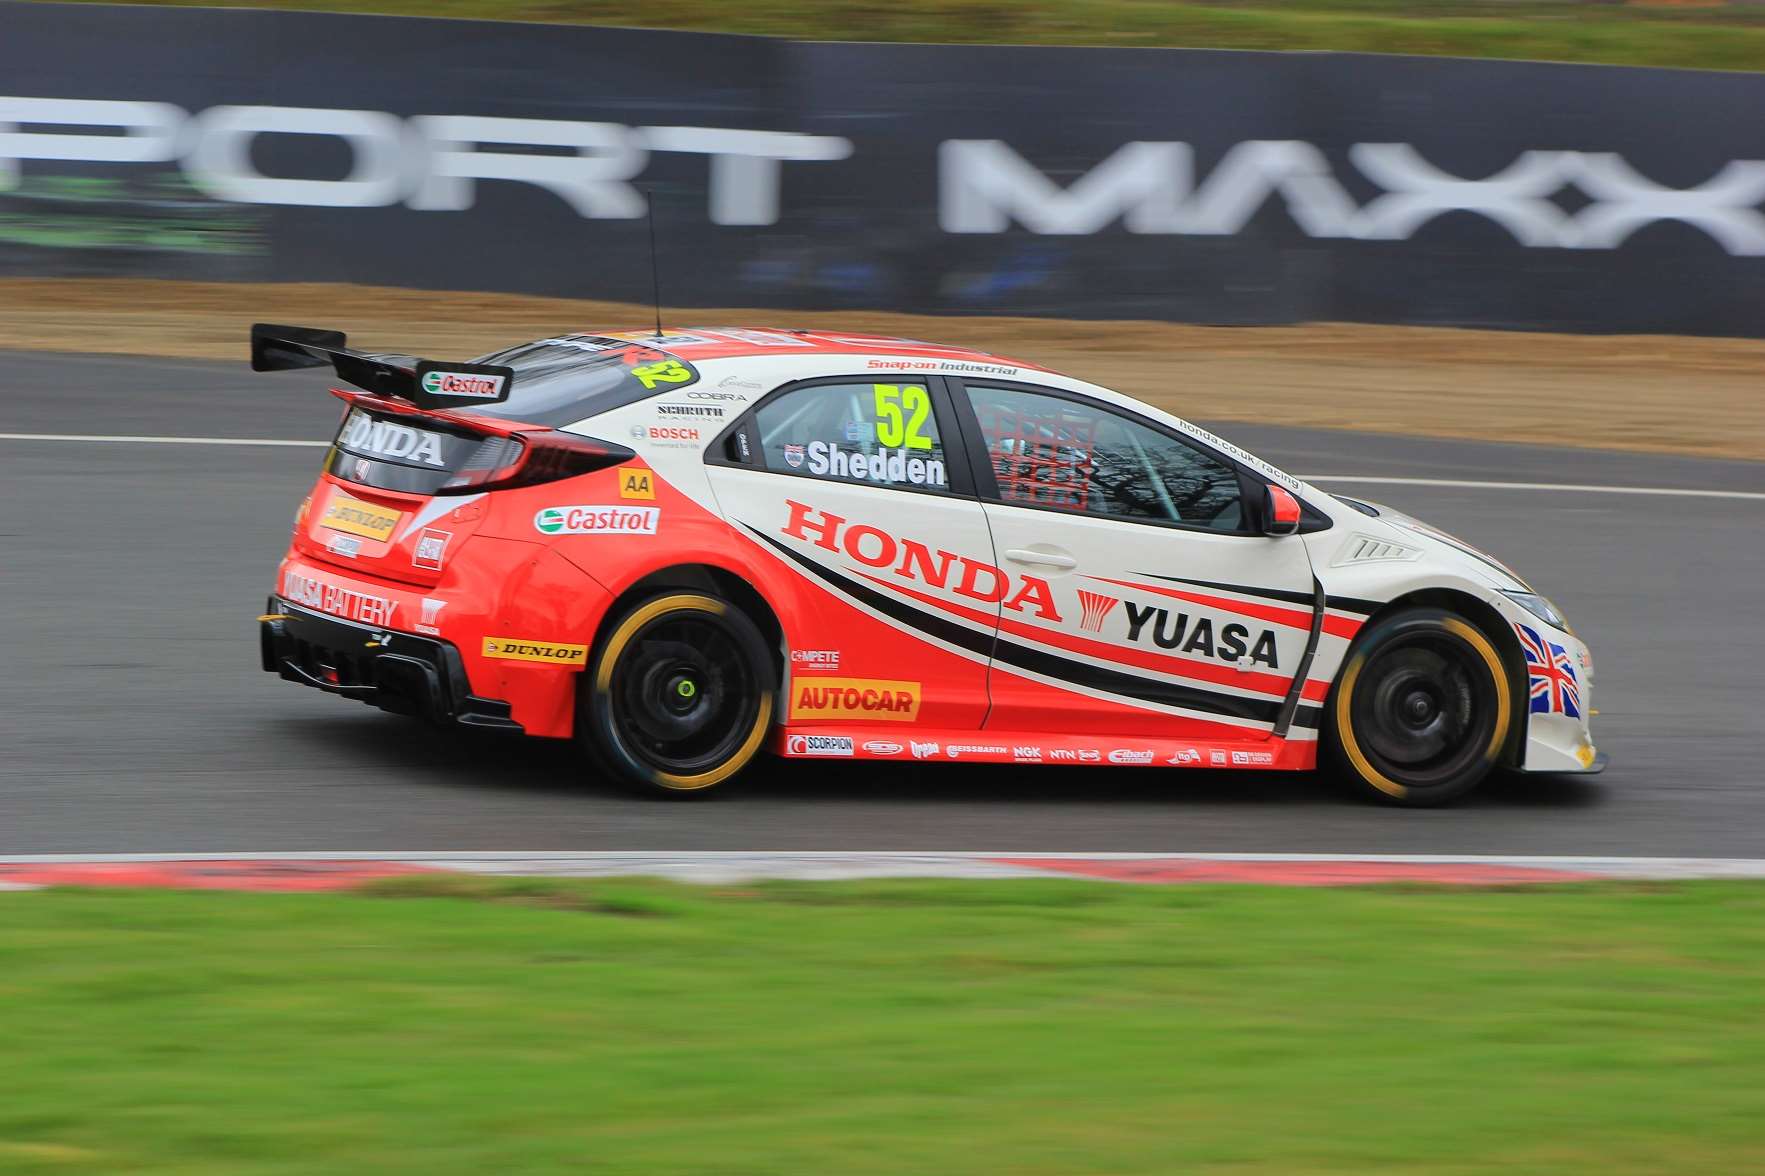 The Honda Yuasa Racing team gave its all-new Type R its debut. Picture: Joe Wright